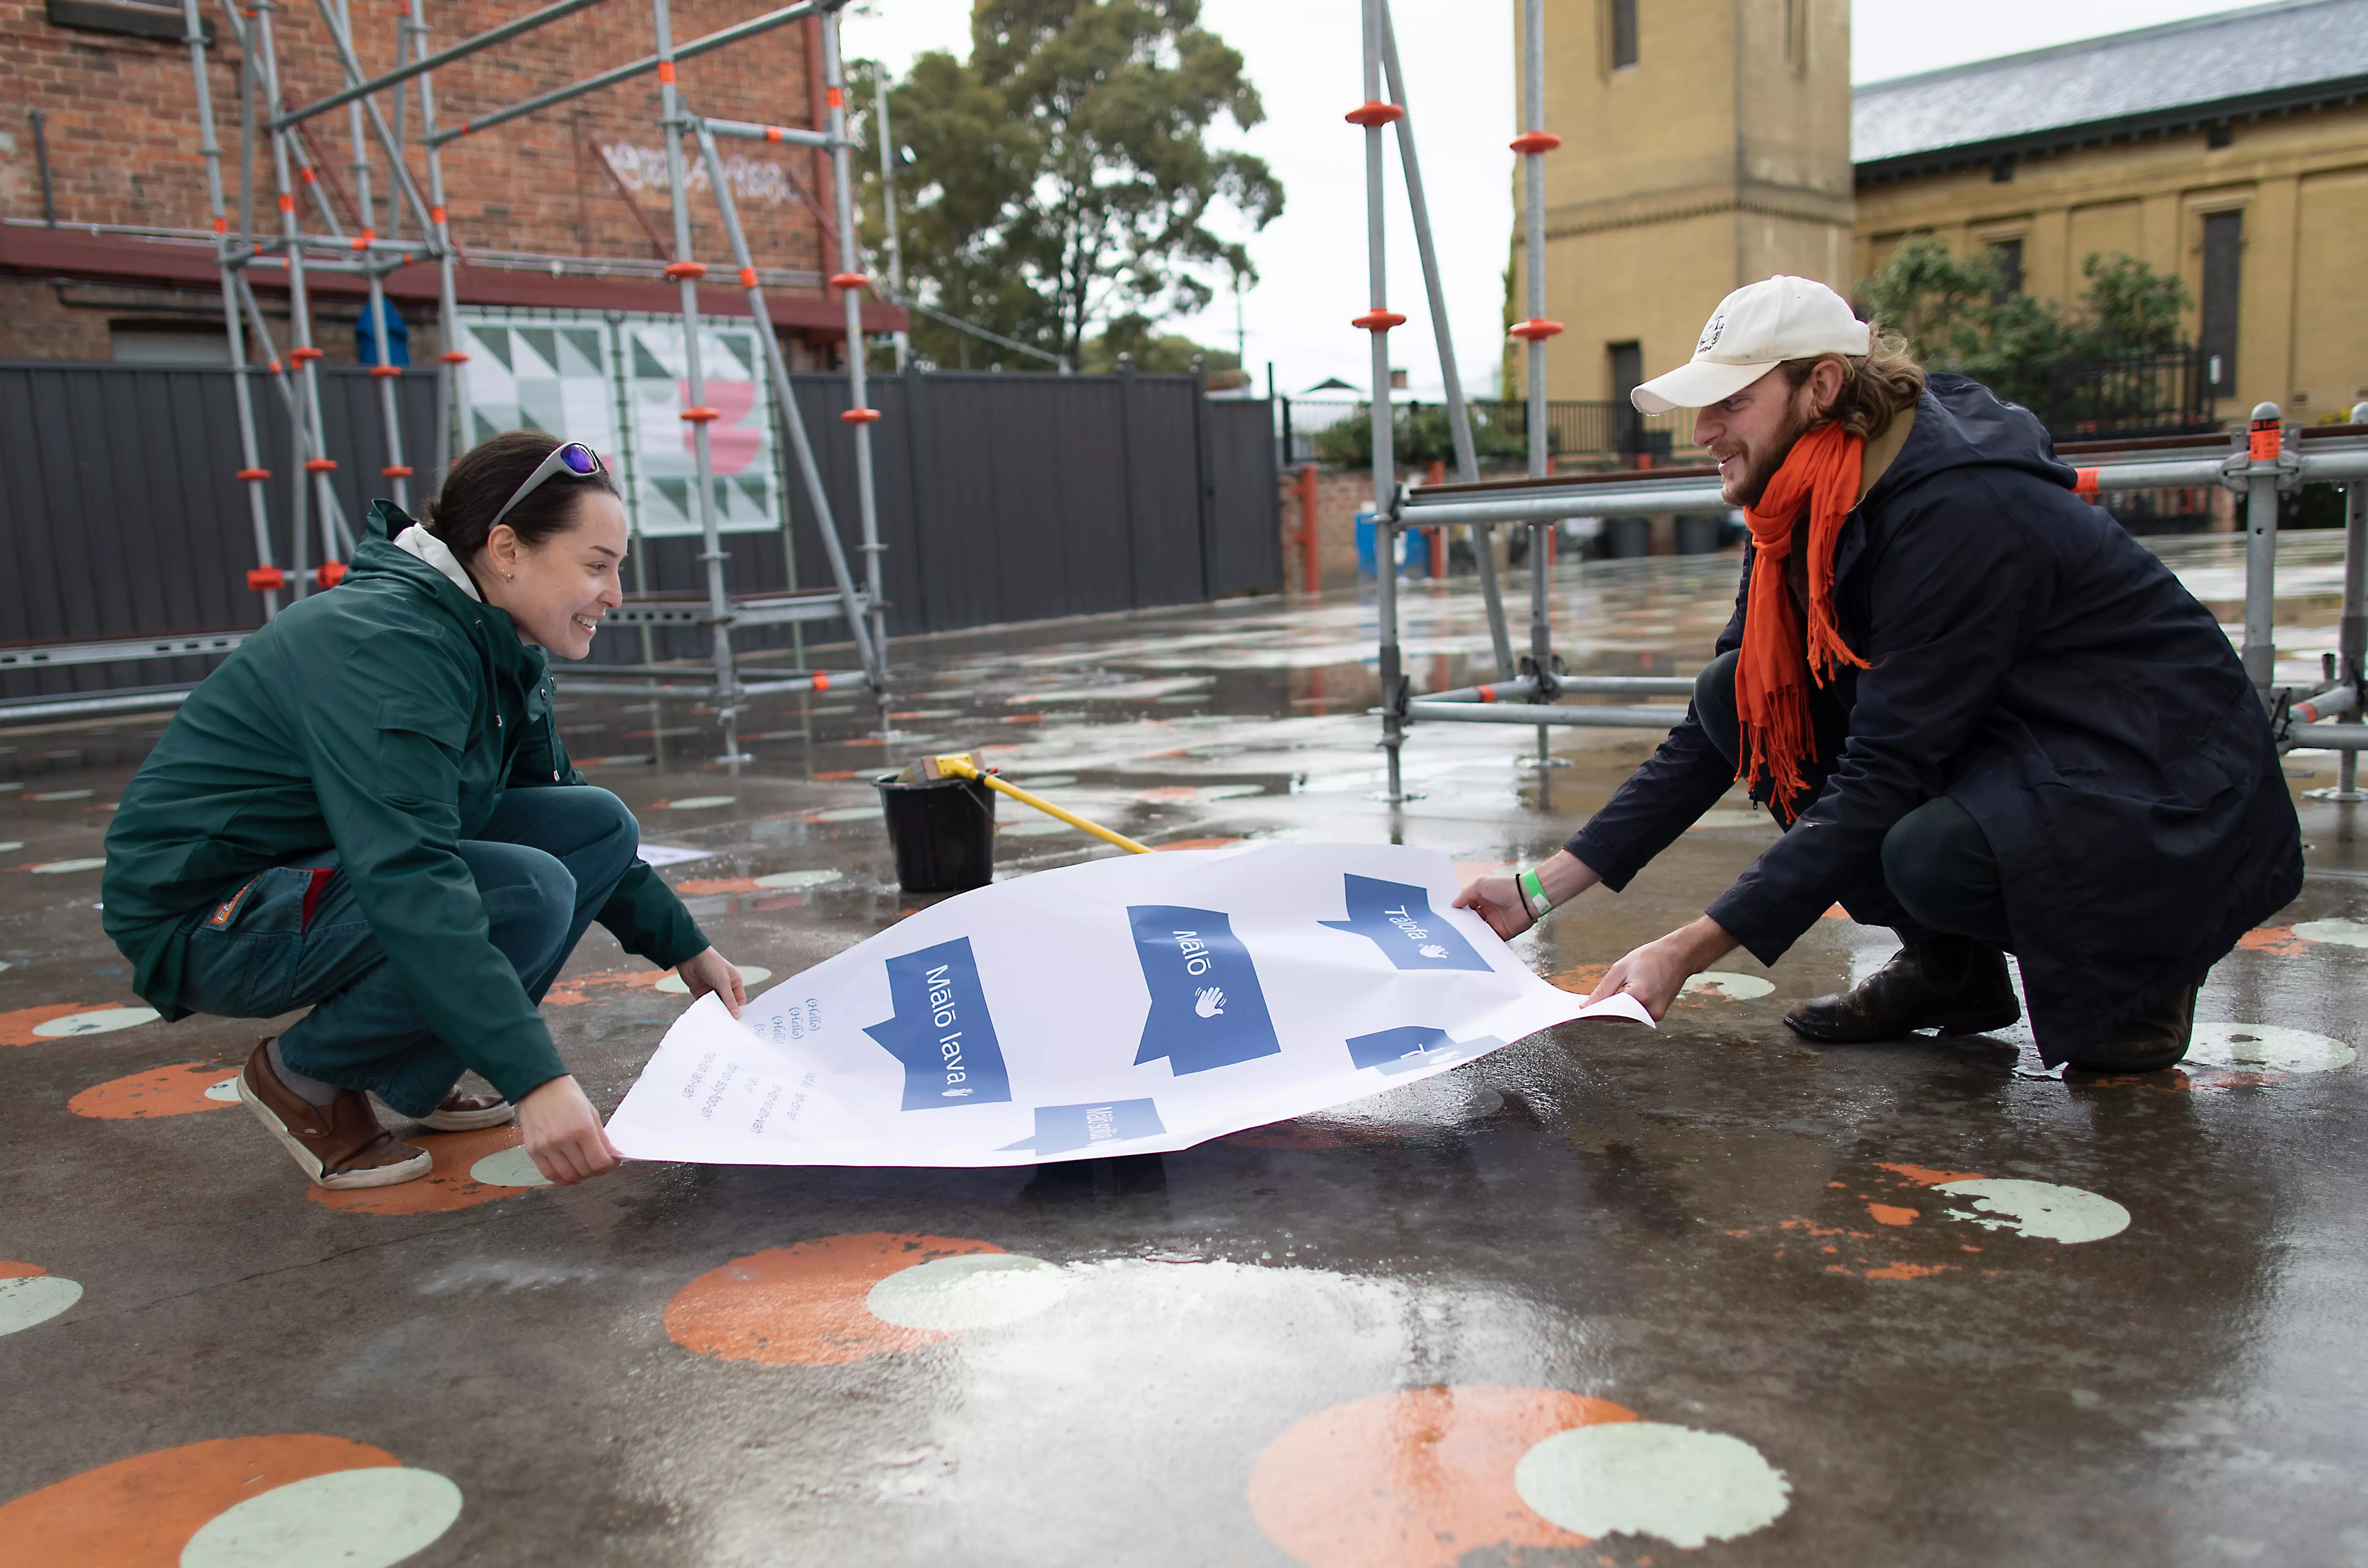 Two people placing installing a poster on the ground while smiling.